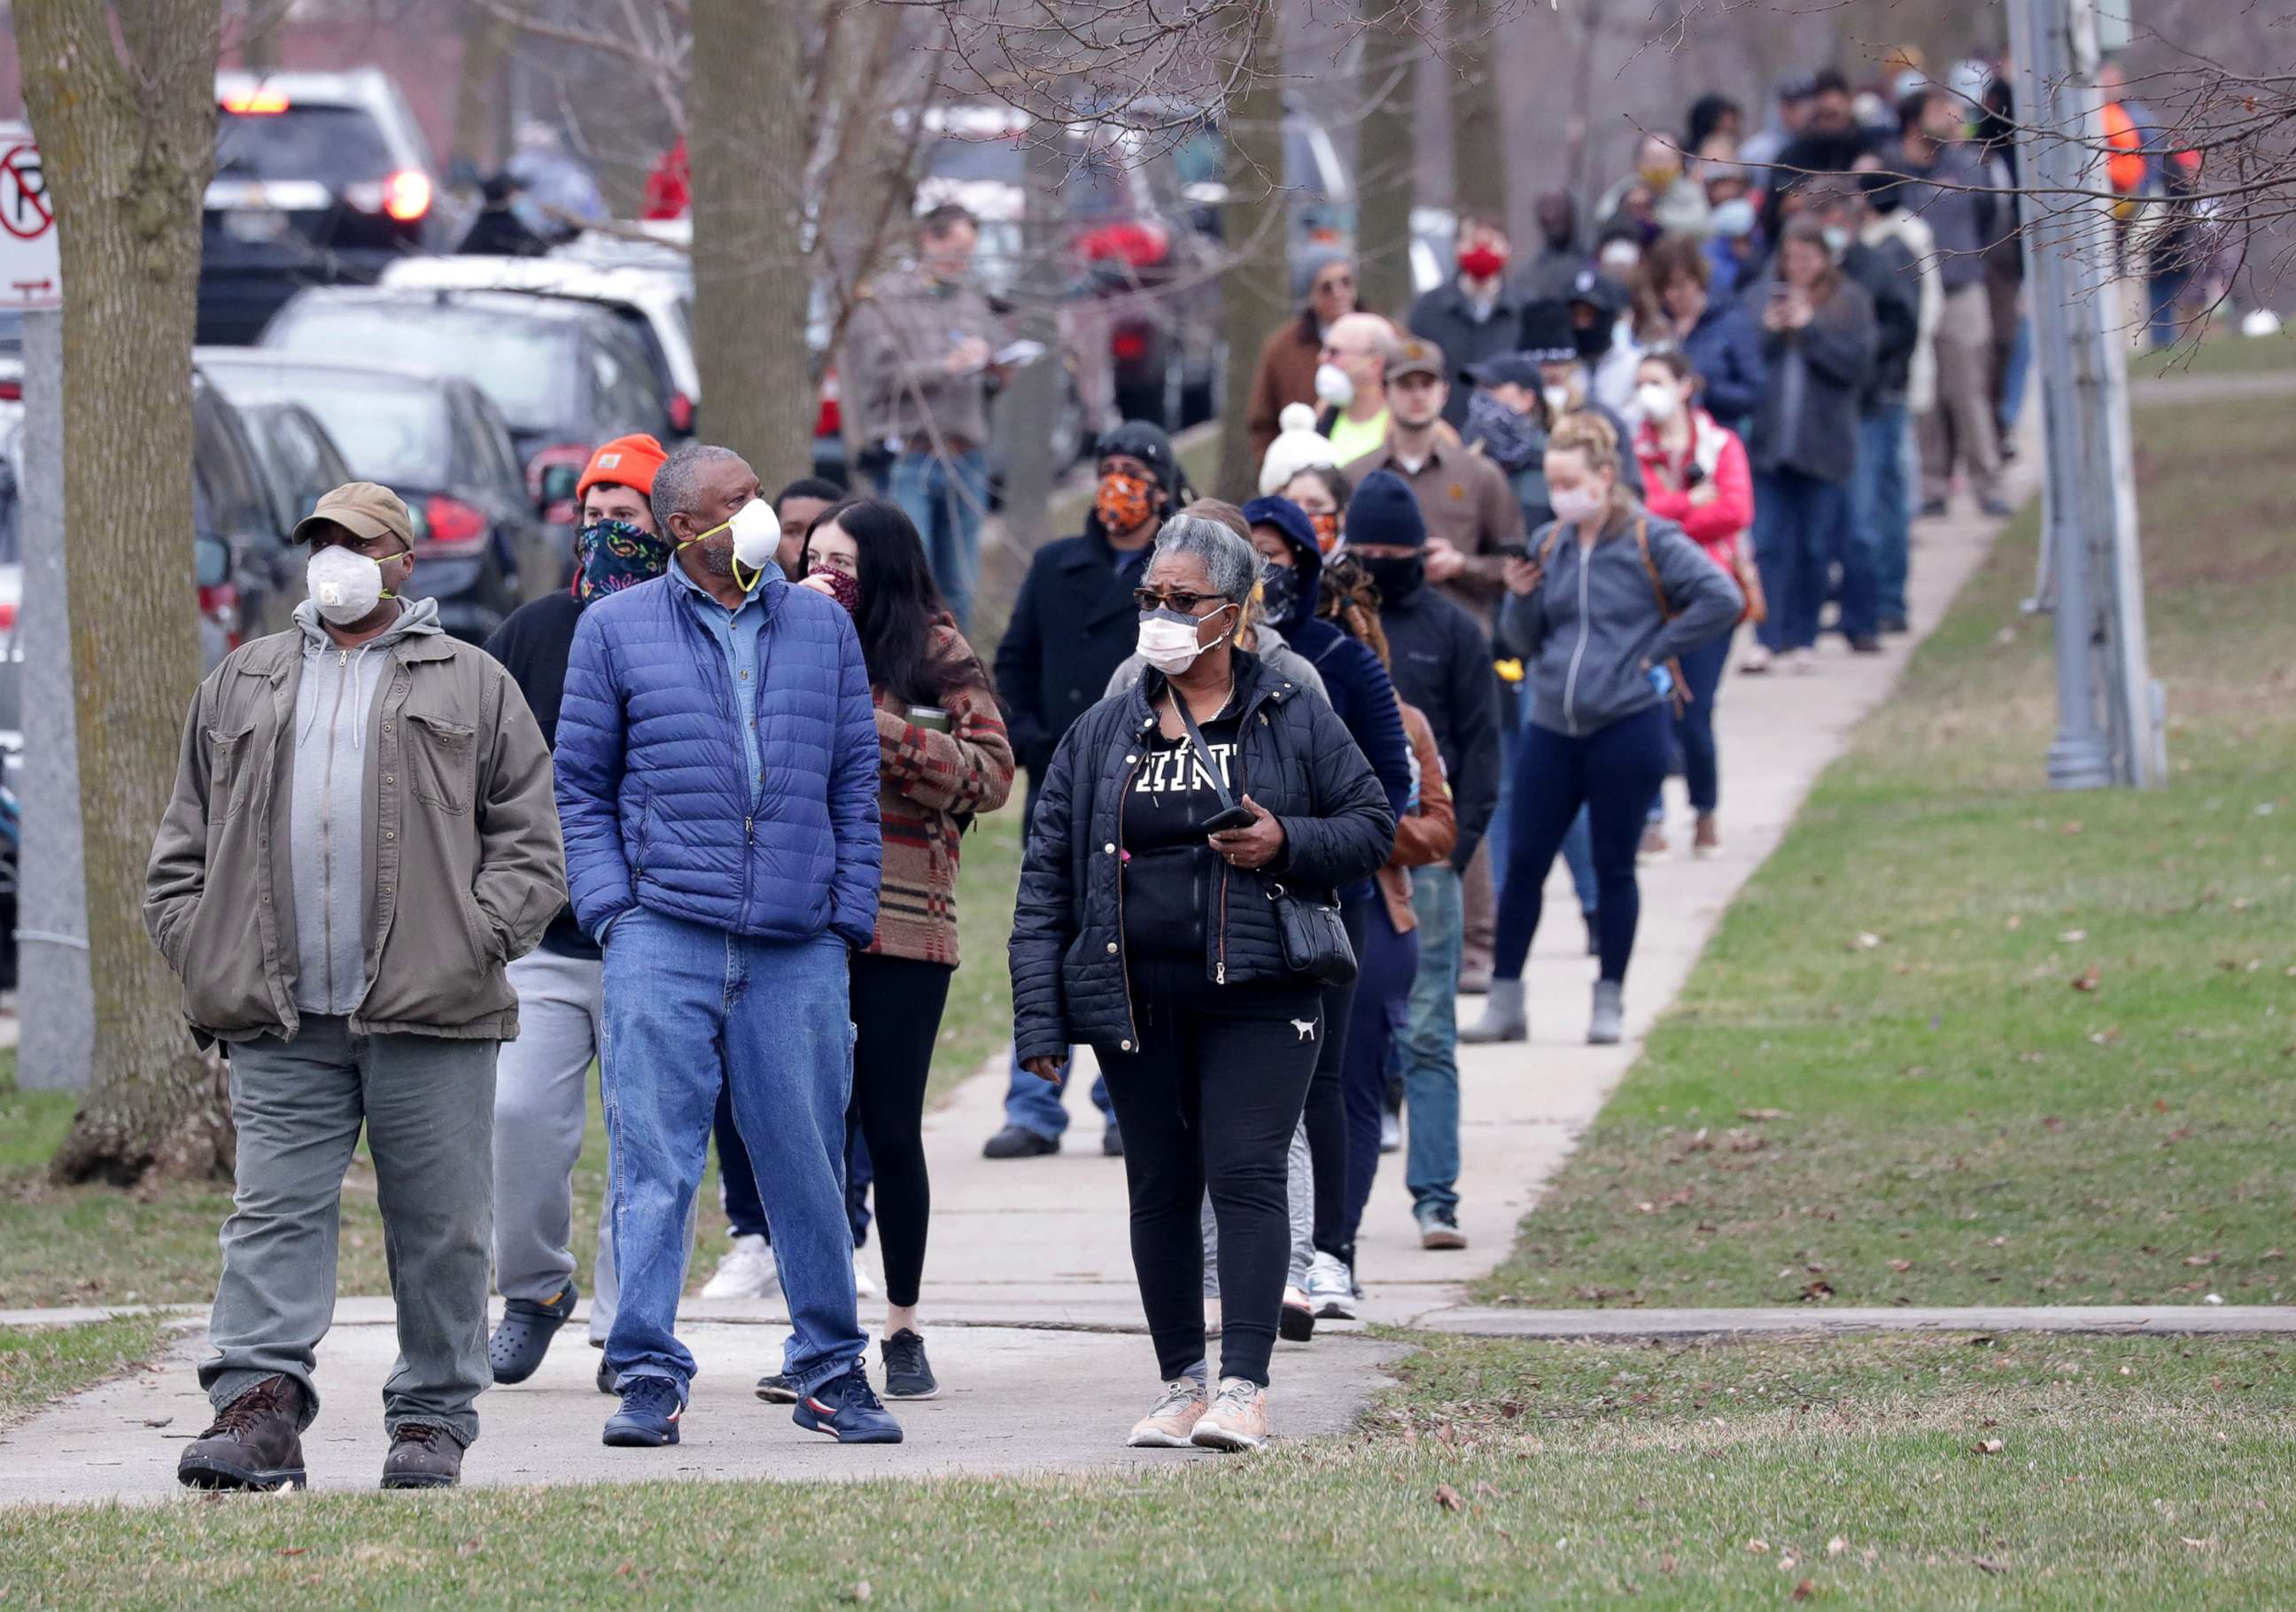 PHOTO: In this April 7, 2020, file photo, people wait in a line to vote in the presidential primary election while wearing masks and practicing social distancing at Riverside High School in Milwaukee.